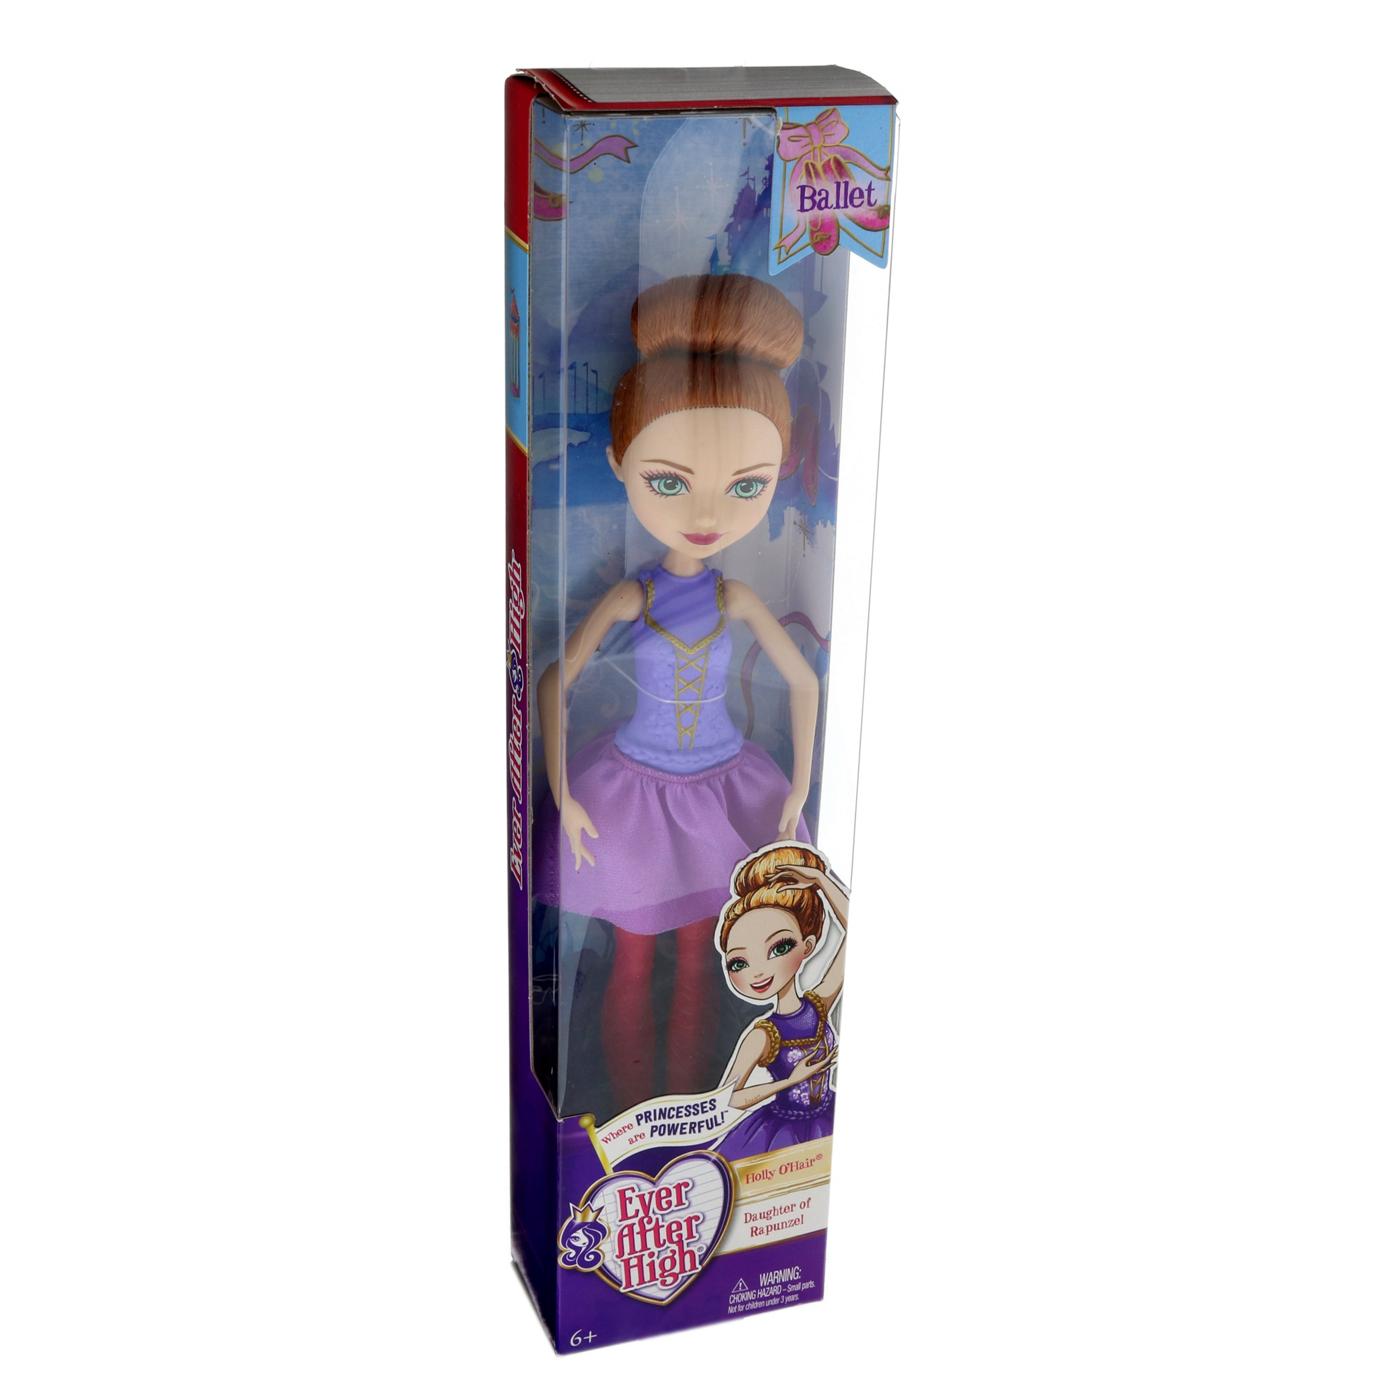 Ever After High Ballet Doll Assortment, Characters May Vary; image 1 of 2